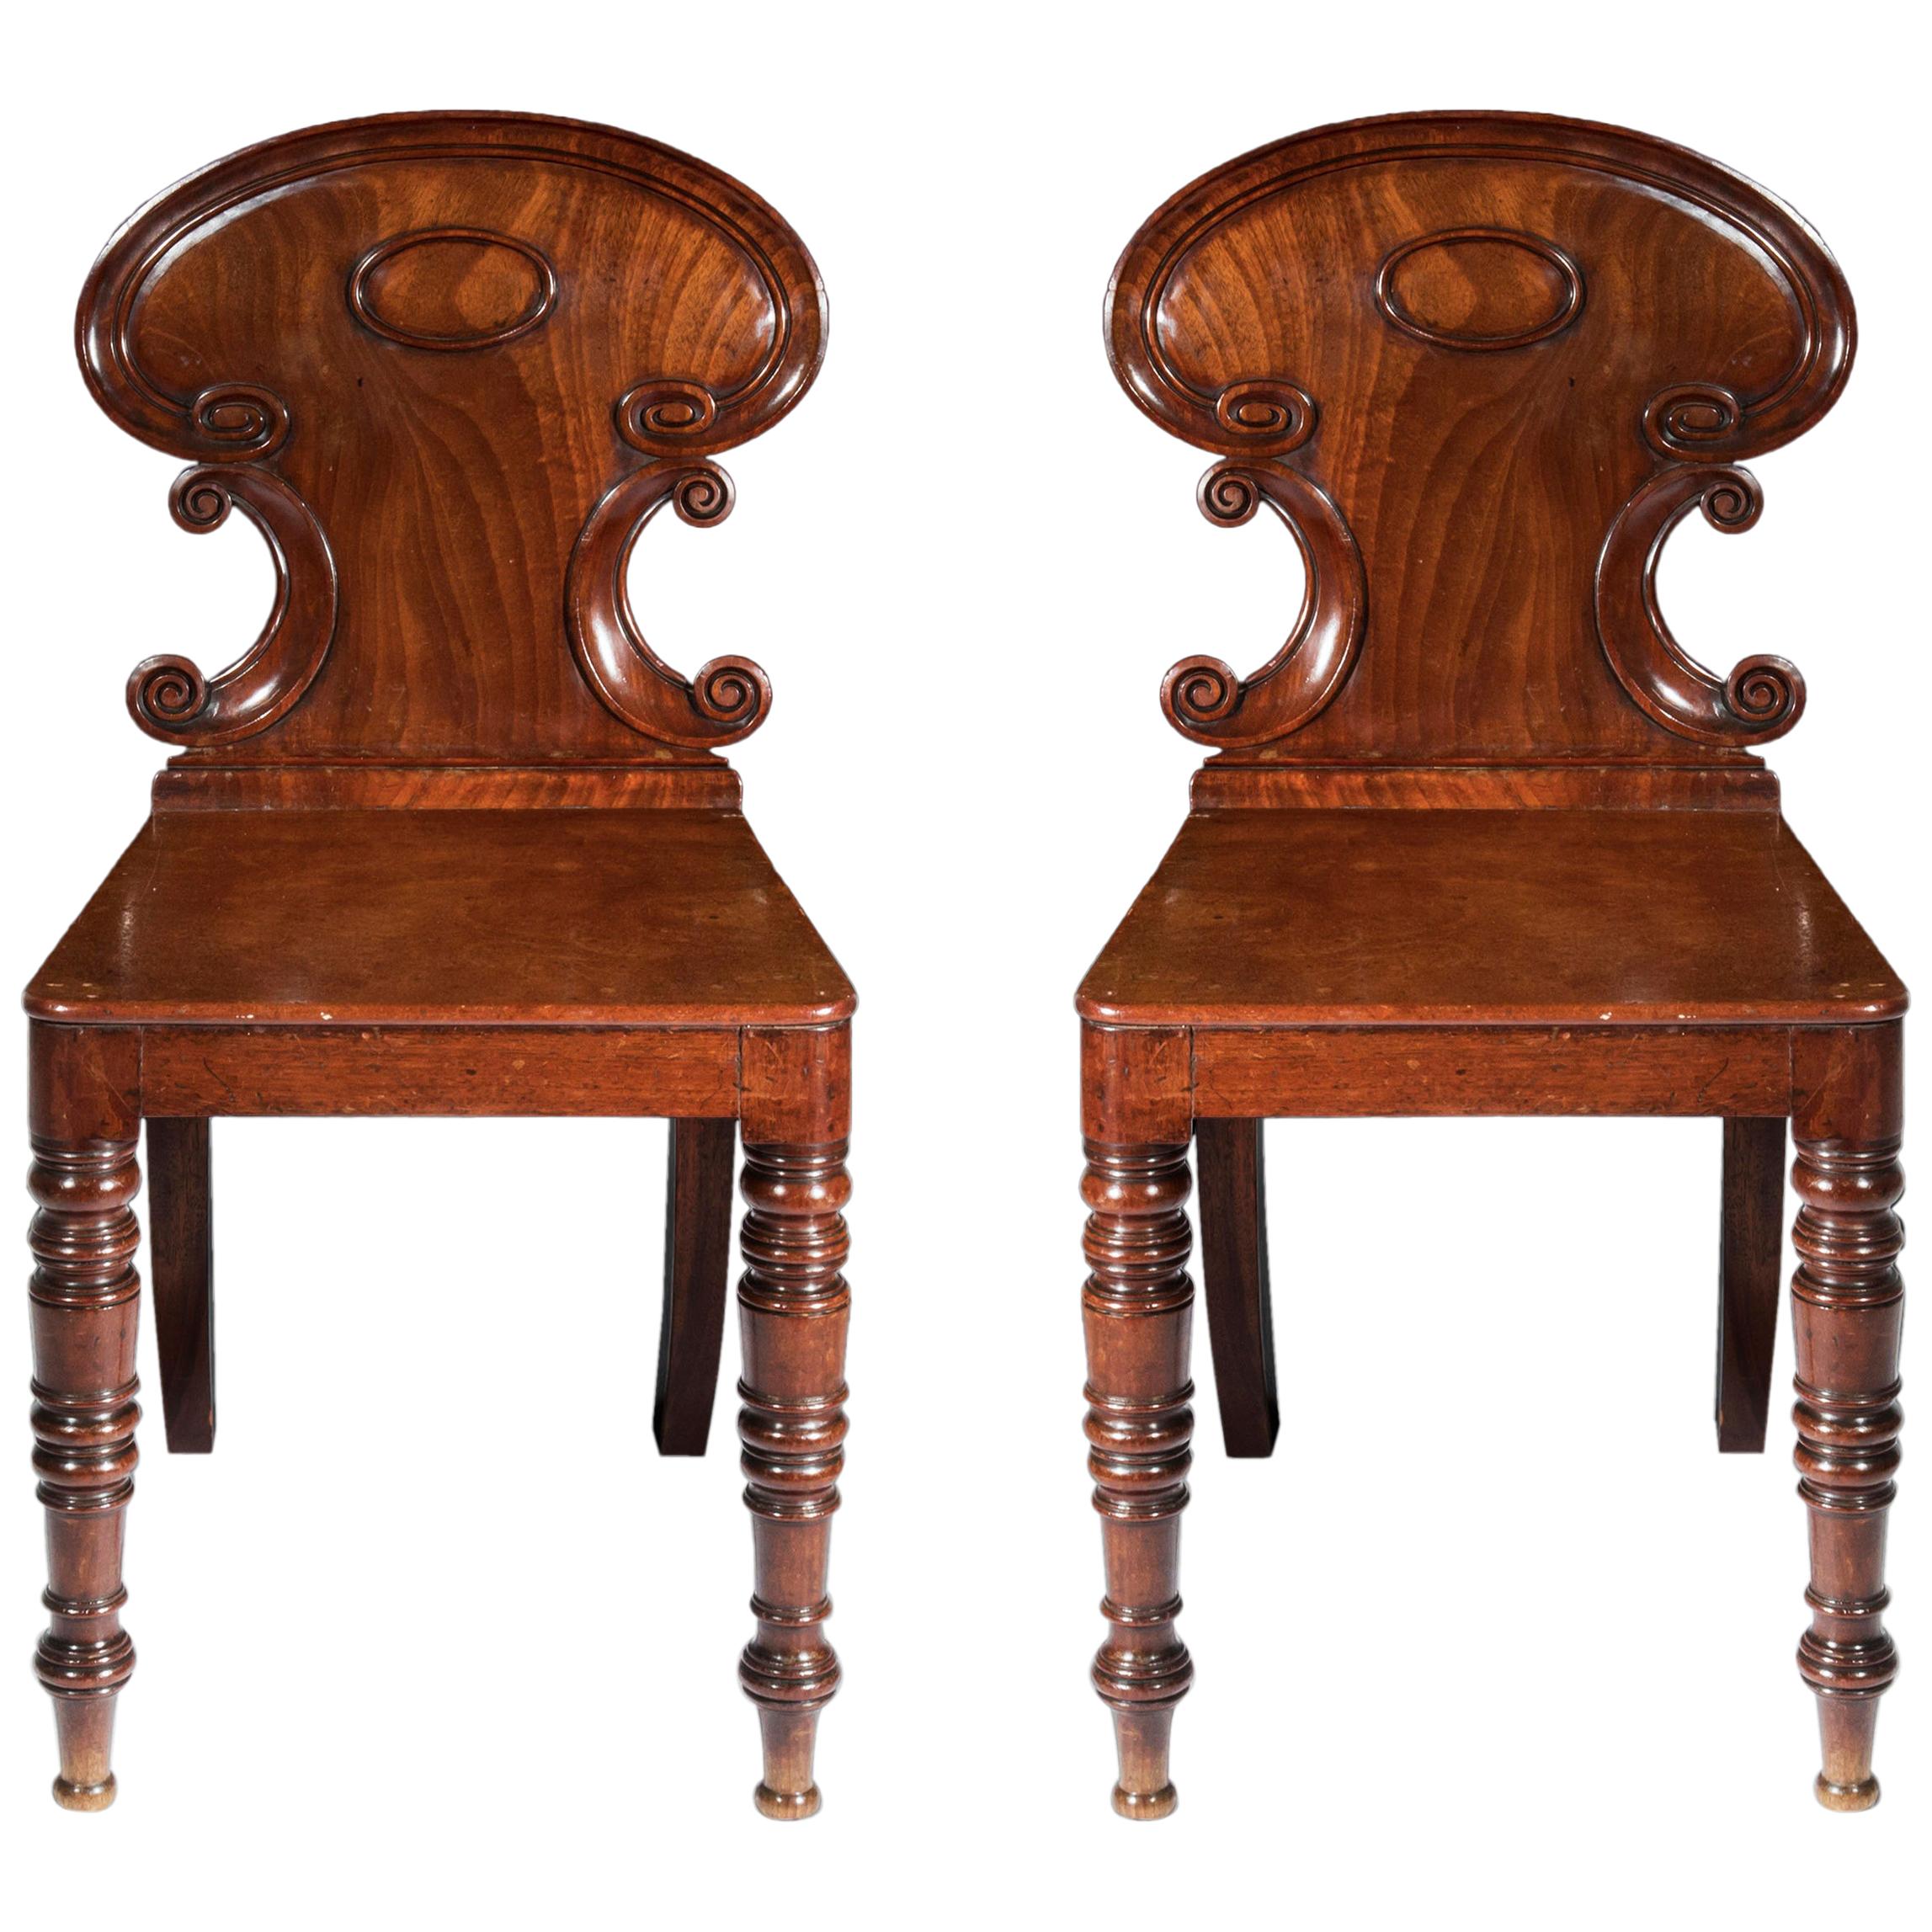 Pair of Antique Regency Hall Chairs, Manner of Gillows